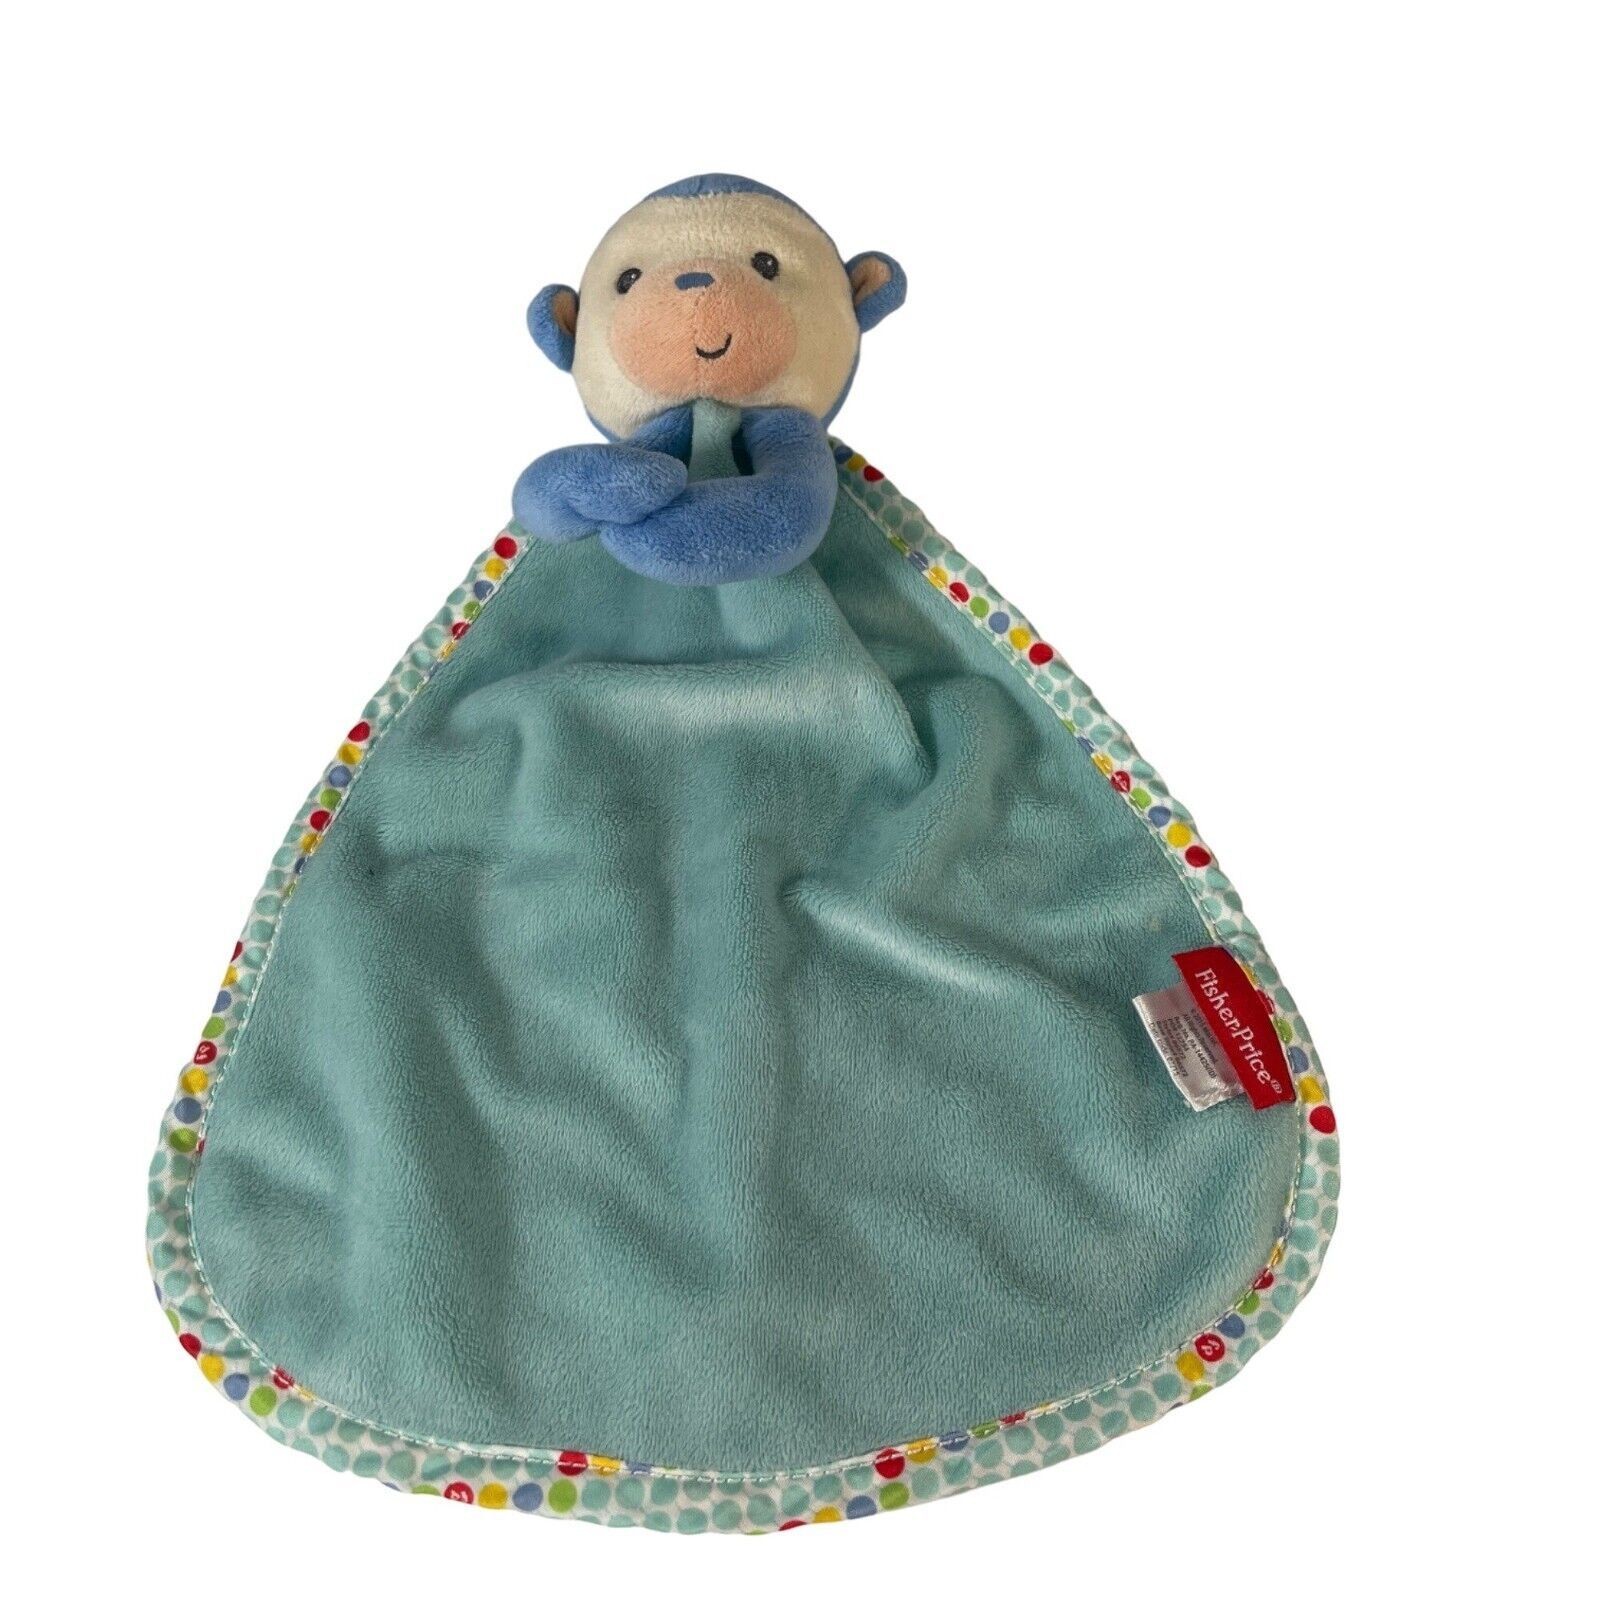 FISHER PRICE BLUE MONKEY SECURITY BLANKET RATTLE LOVEY - $9.89